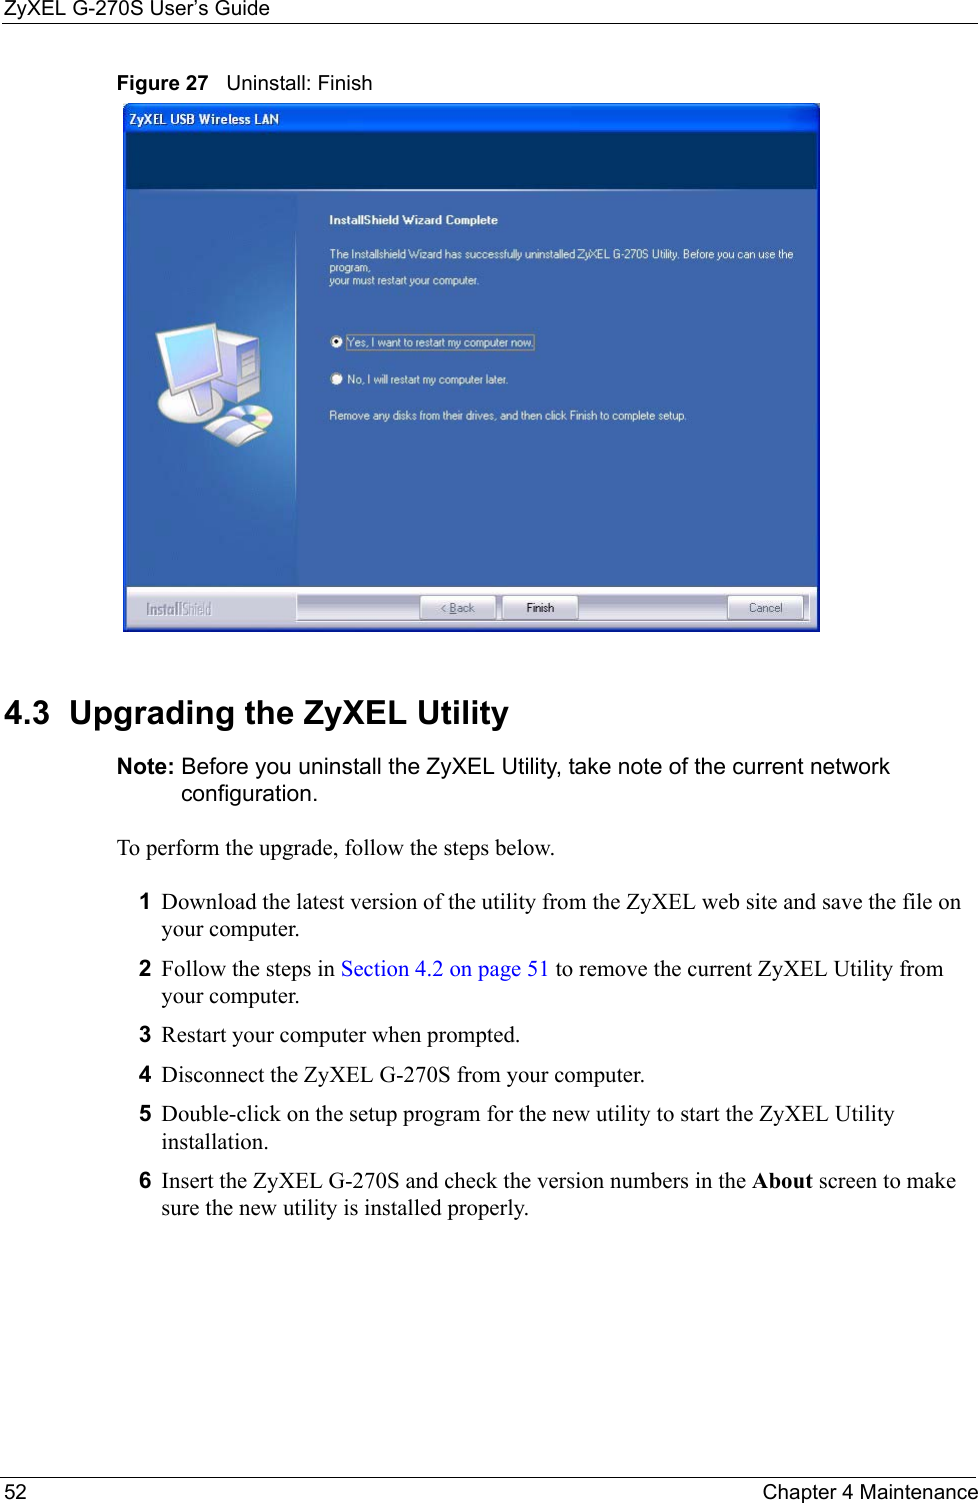 ZyXEL G-270S User’s Guide52 Chapter 4 MaintenanceFigure 27   Uninstall: Finish 4.3  Upgrading the ZyXEL Utility Note: Before you uninstall the ZyXEL Utility, take note of the current network configuration.To perform the upgrade, follow the steps below.1Download the latest version of the utility from the ZyXEL web site and save the file on your computer.2Follow the steps in Section 4.2 on page 51 to remove the current ZyXEL Utility from your computer.3Restart your computer when prompted.4Disconnect the ZyXEL G-270S from your computer.5Double-click on the setup program for the new utility to start the ZyXEL Utility installation.6Insert the ZyXEL G-270S and check the version numbers in the About screen to make sure the new utility is installed properly.